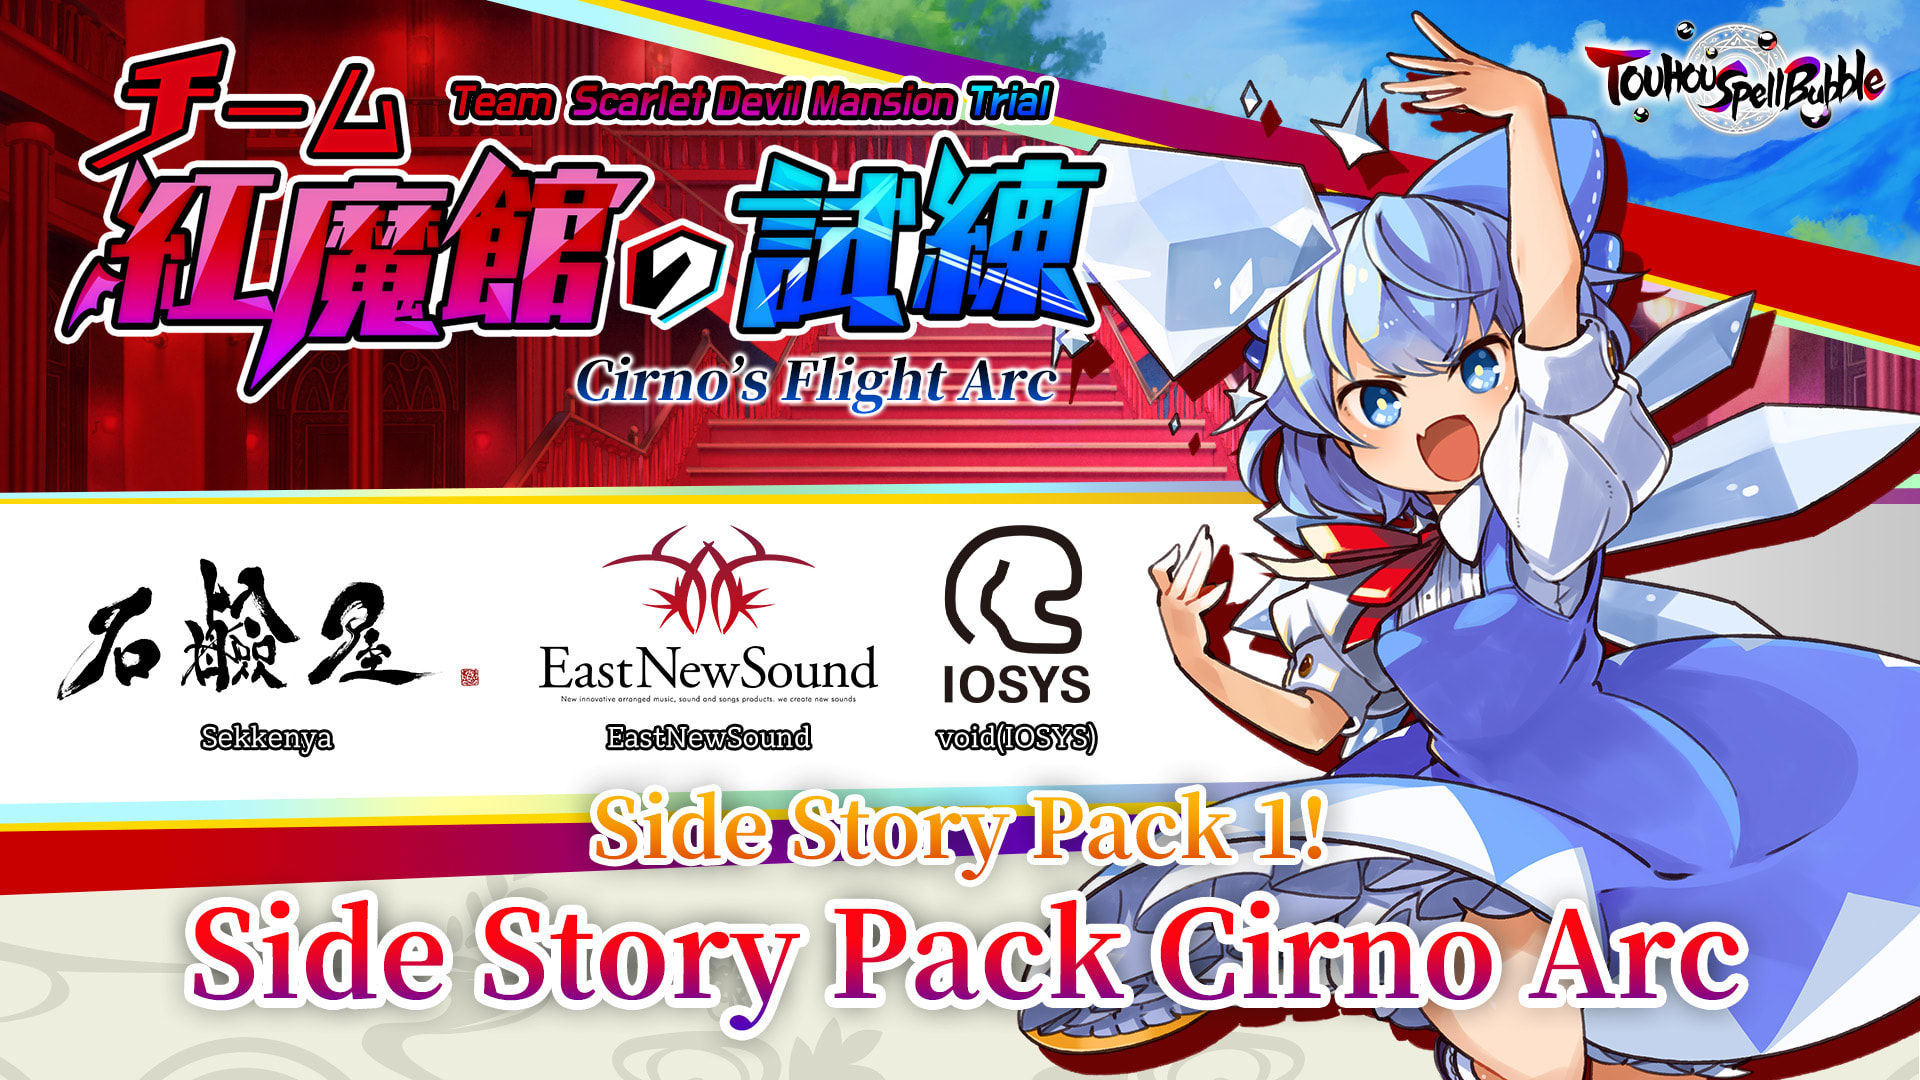 Side Story Pack Cirno Arc